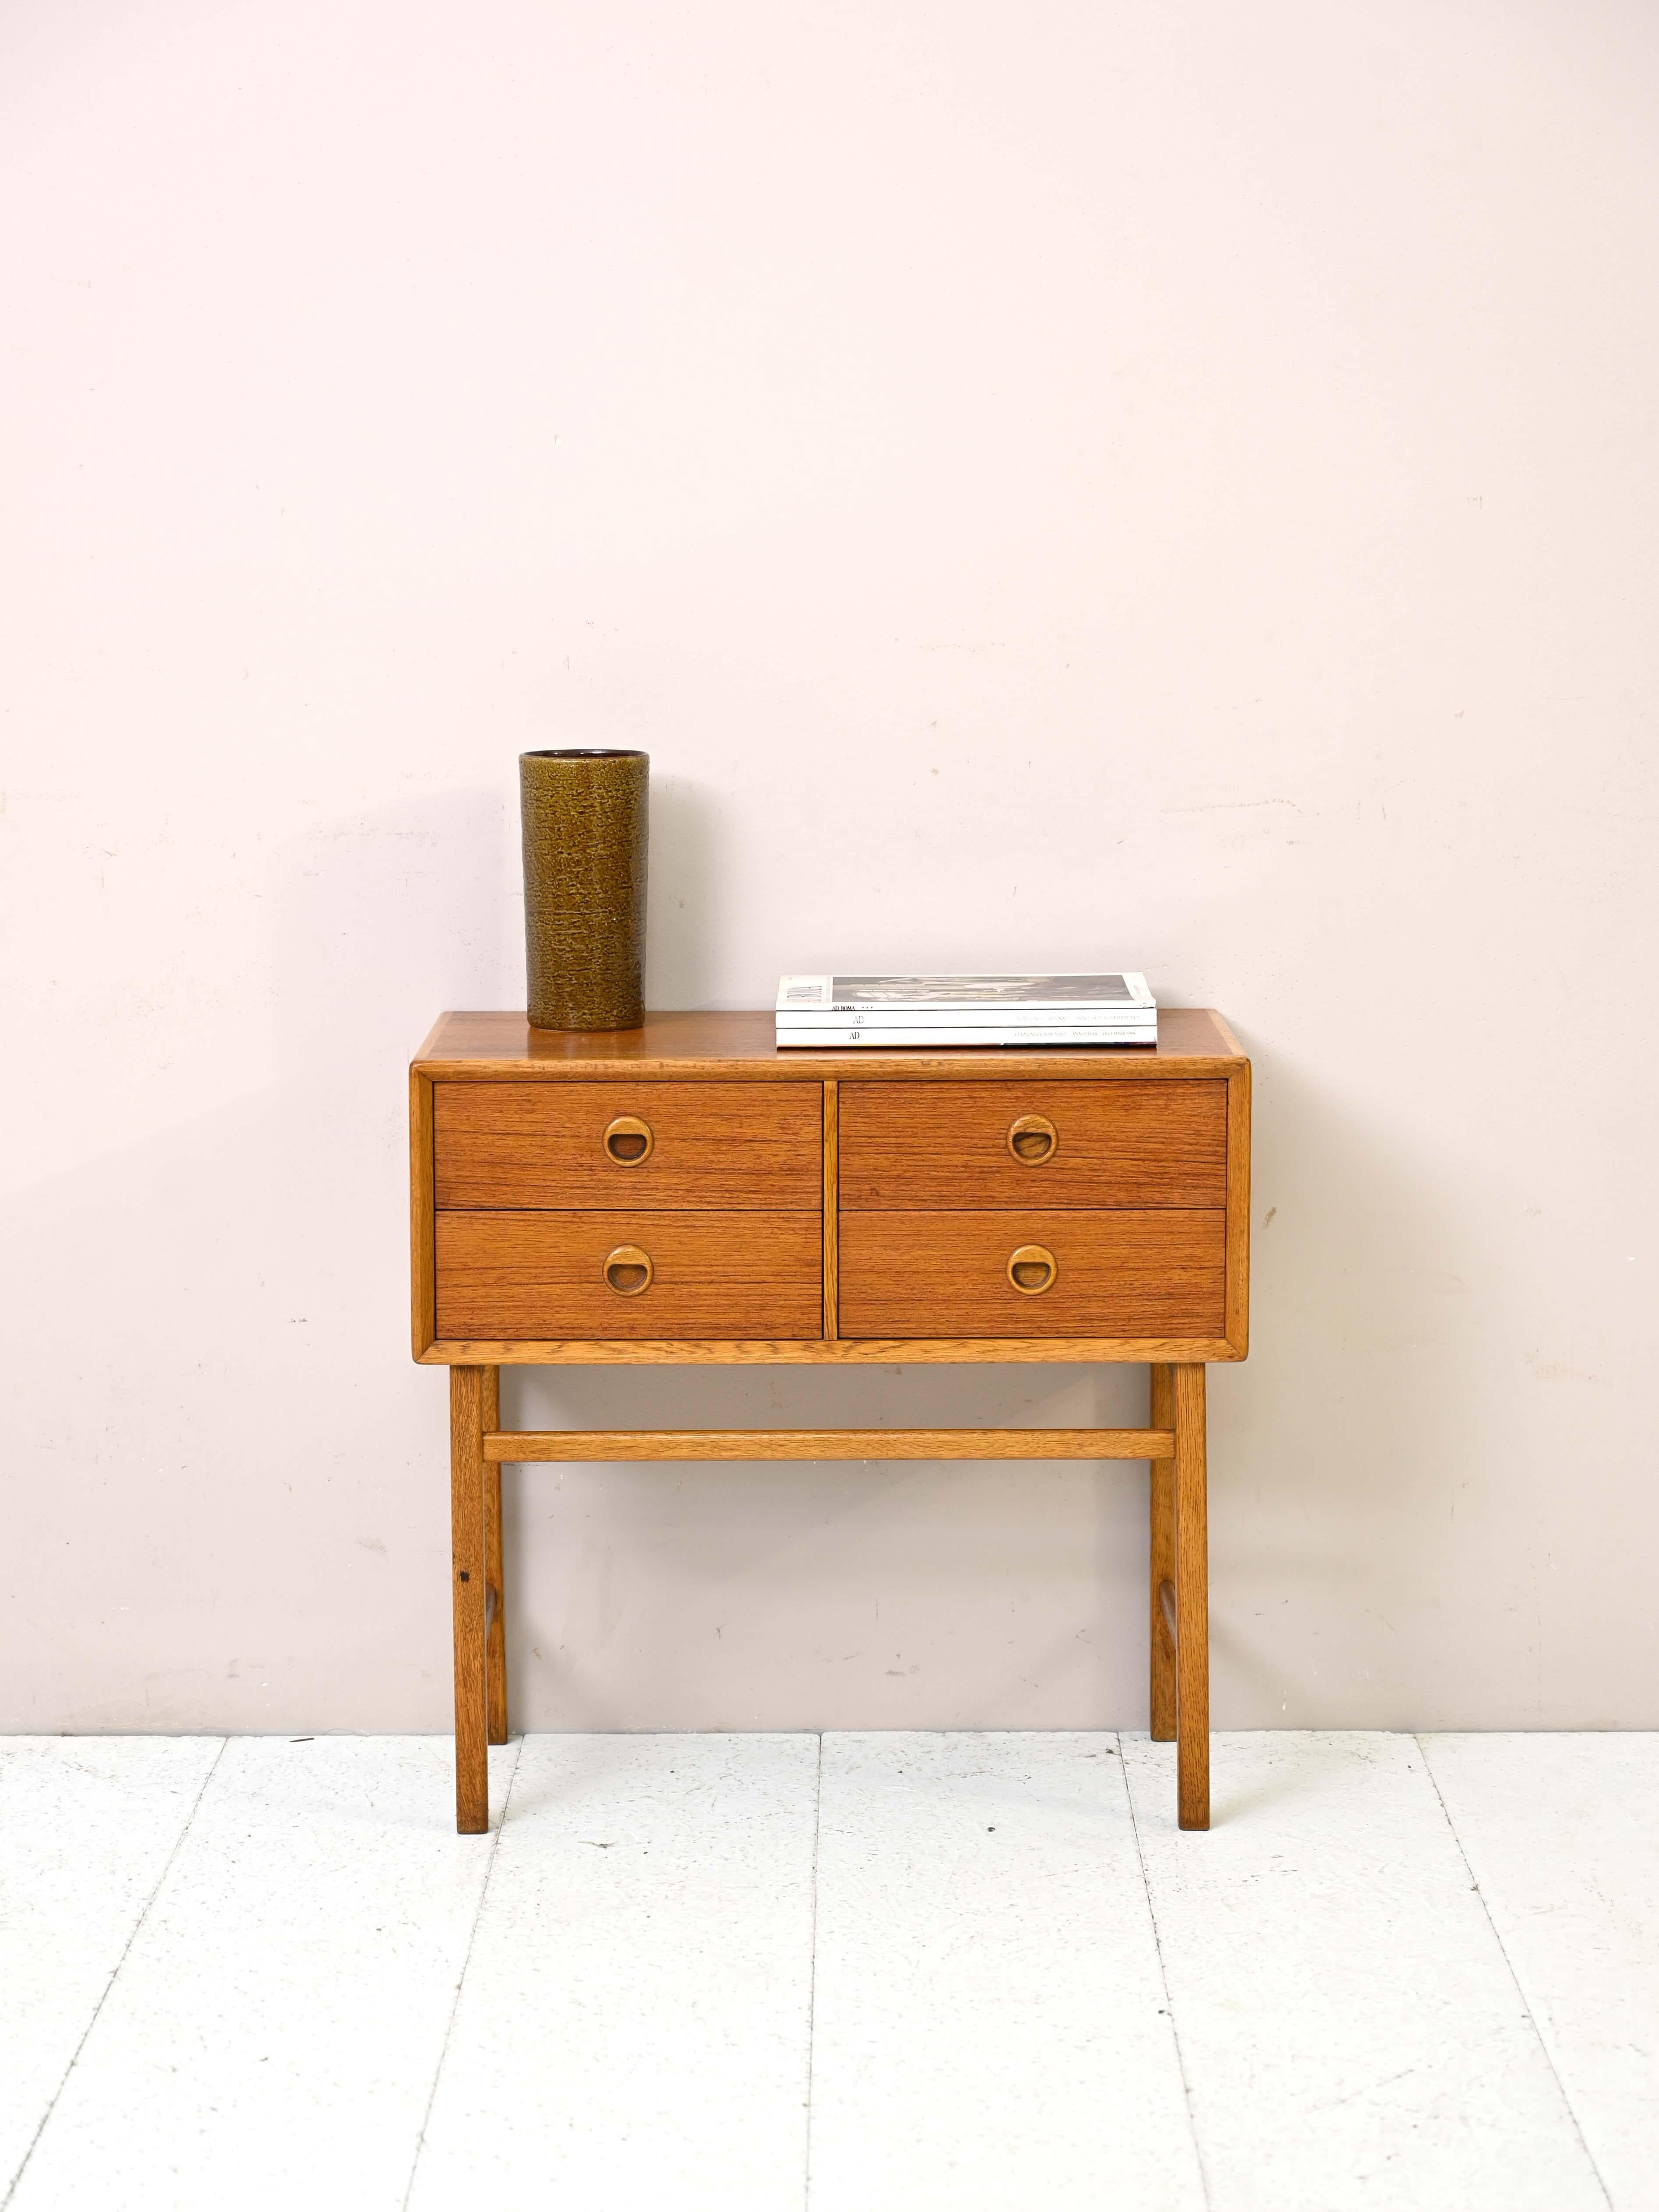 Small vintage Scandinavian chest of drawers.

An originally shaped piece of furniture consisting of a square-shaped frame with four drawers. 
The simple, straightforward design is enhanced by the use of the two woods of teak and oak and the handle